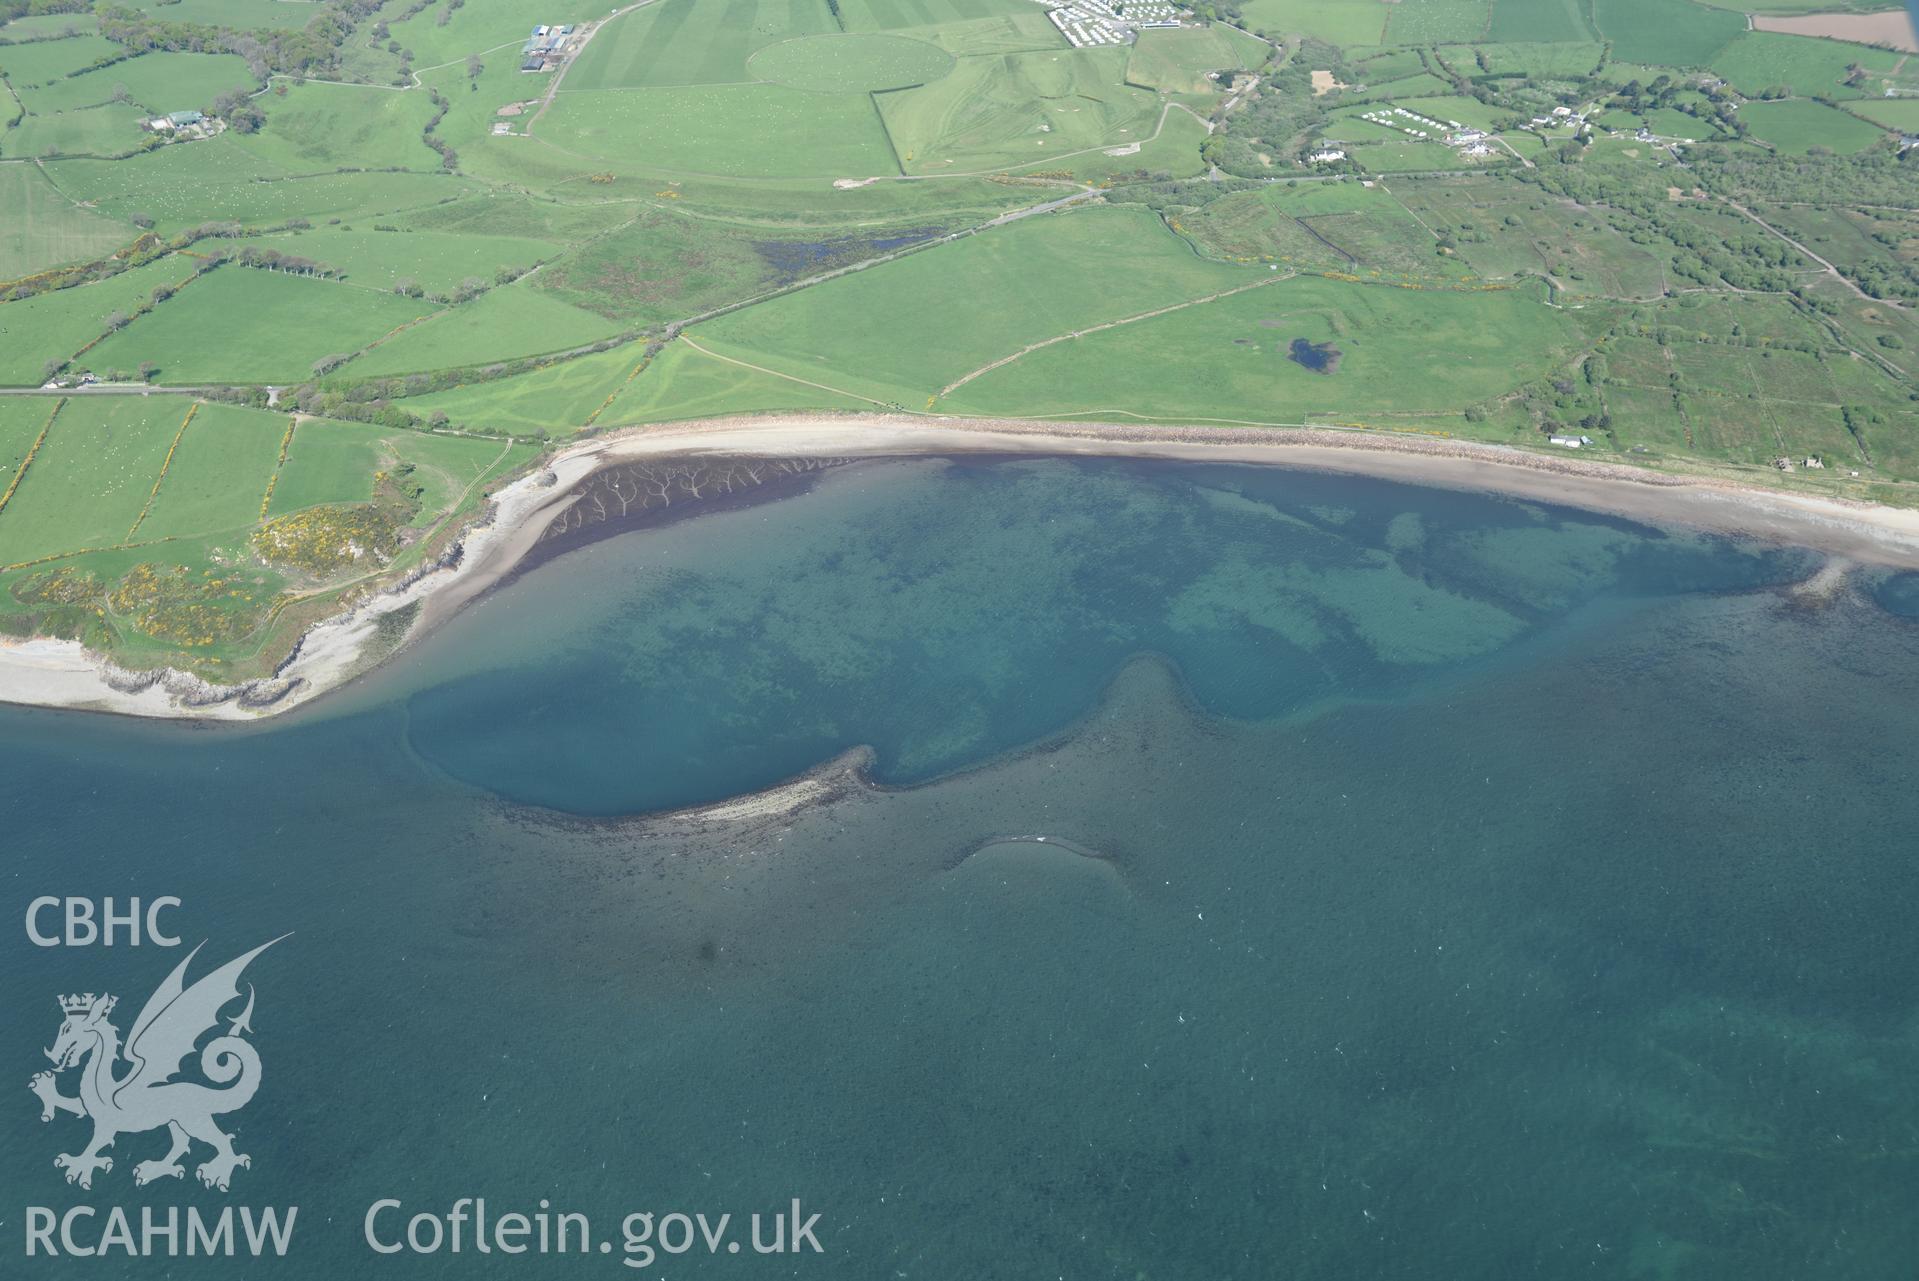 Aerial photography of Carreg y Defaid taken on 3rd May 2017.  Baseline aerial reconnaissance survey for the CHERISH Project. ? Crown: CHERISH PROJECT 2017. Produced with EU funds through the Ireland Wales Co-operation Programme 2014-2020. All material made freely available through the Open Government Licence.